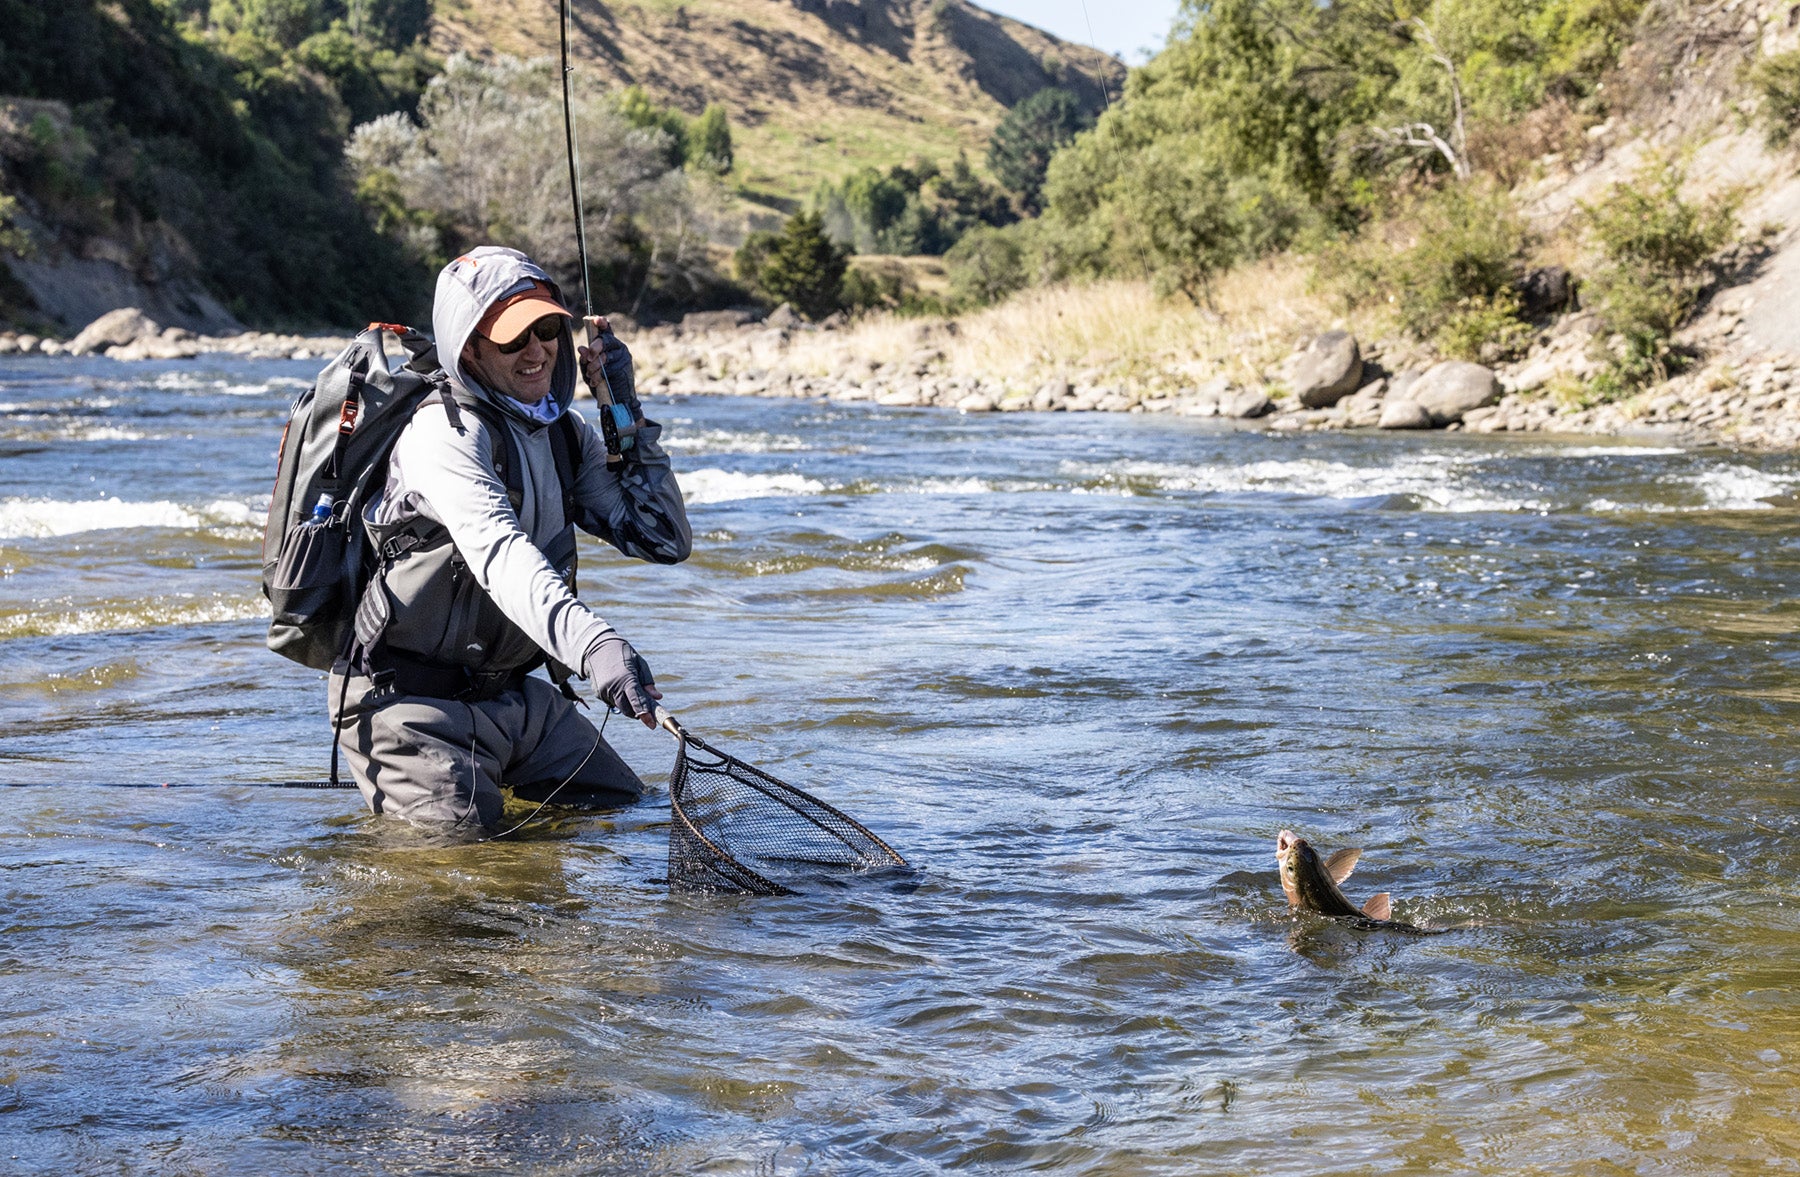 Call Me Simms Boy, I Love My G4Z Waders - Fly Fishing